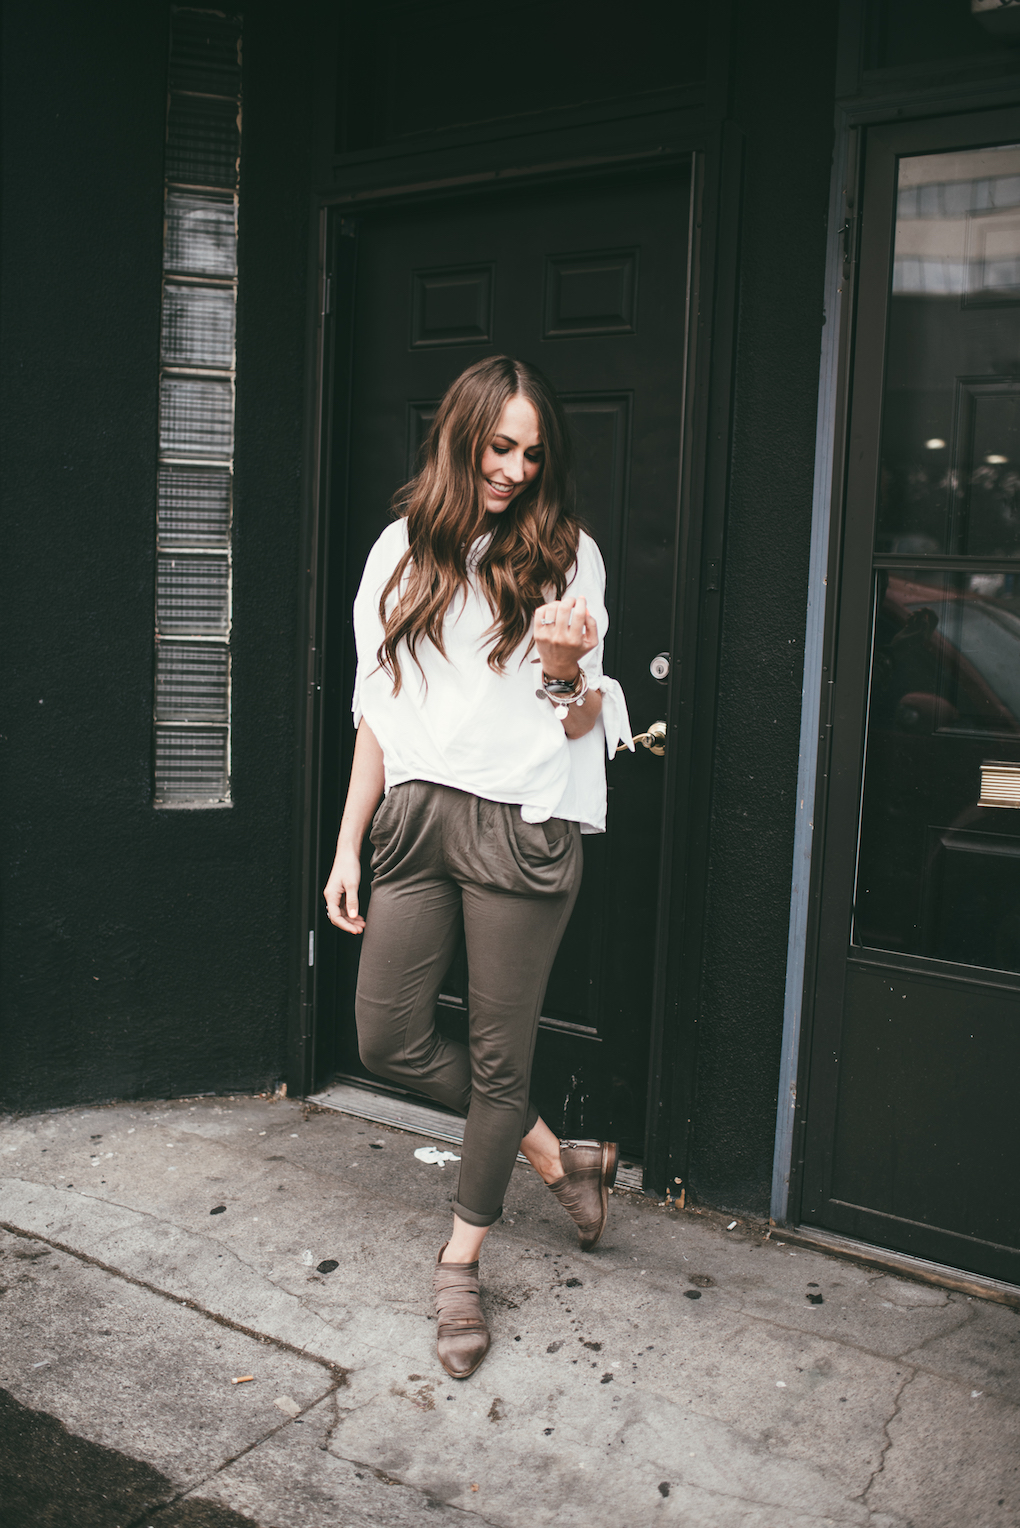 olive green knit green pants with oversized white top on girl standing in front of all black doorway with long brown curled hair